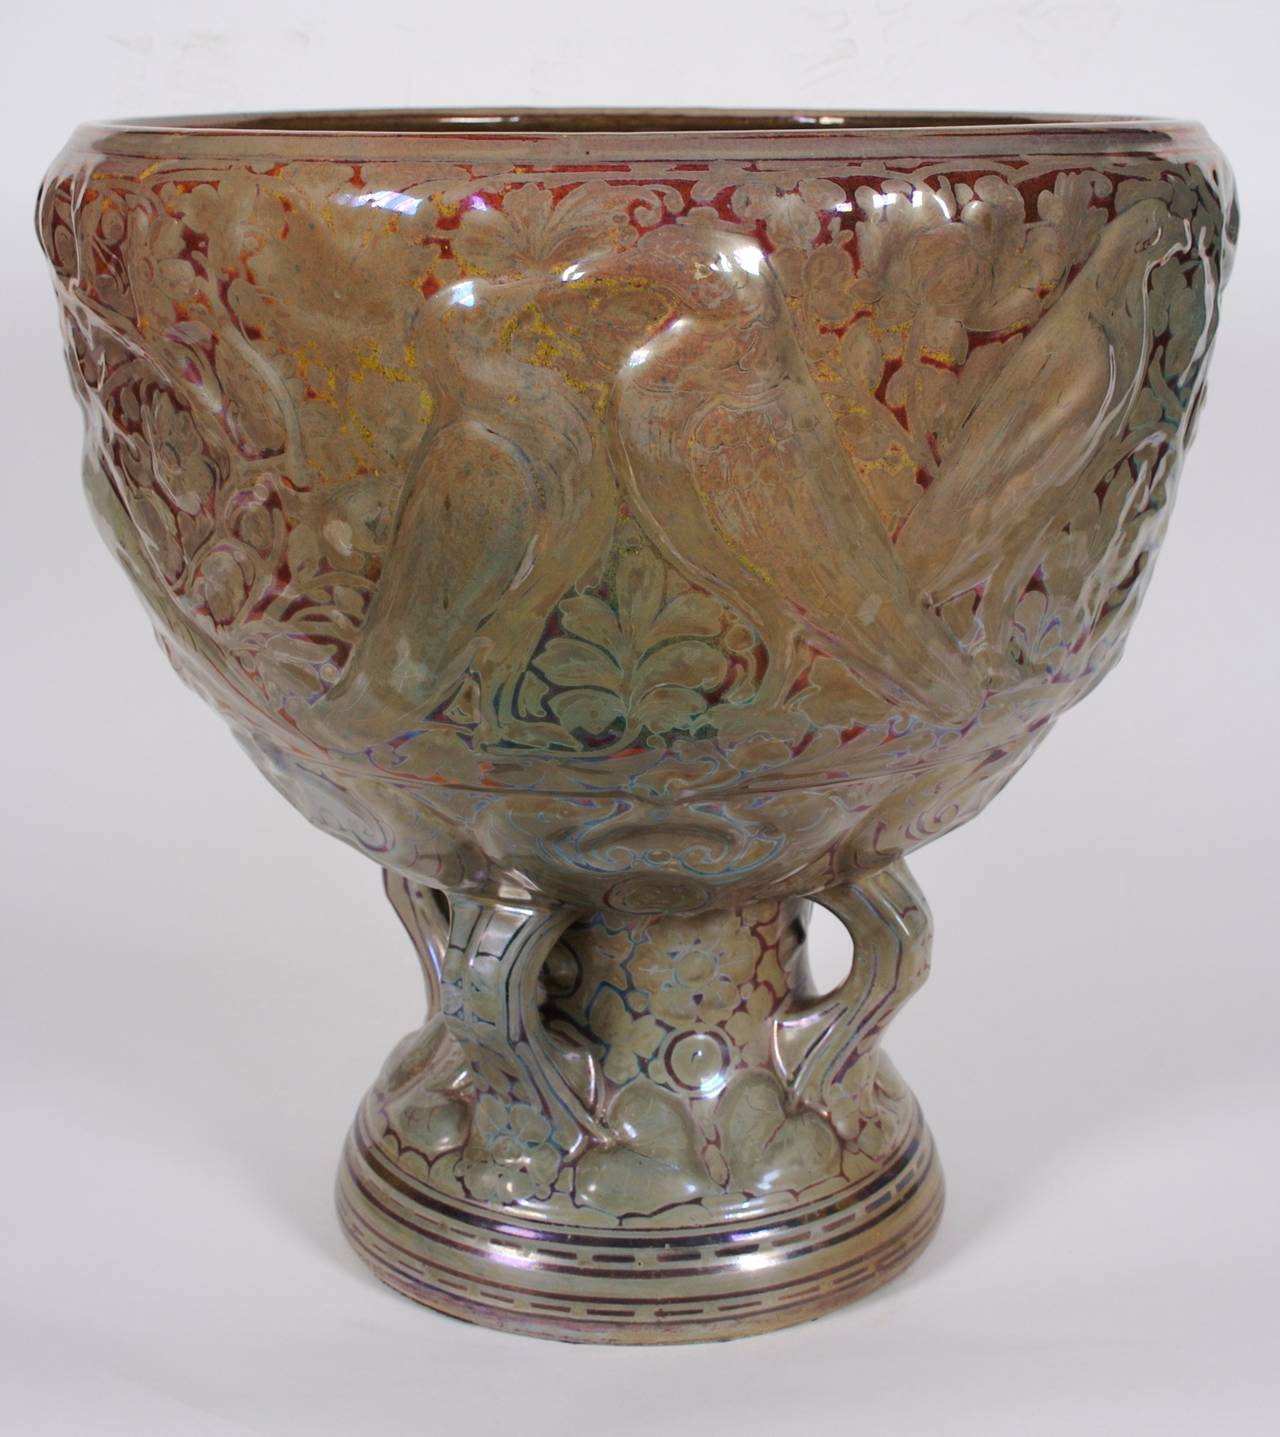 A French ceramic jardiniere in the style of Clement Massier, early 20th century lovely luster glaze; bird and foliage motif.